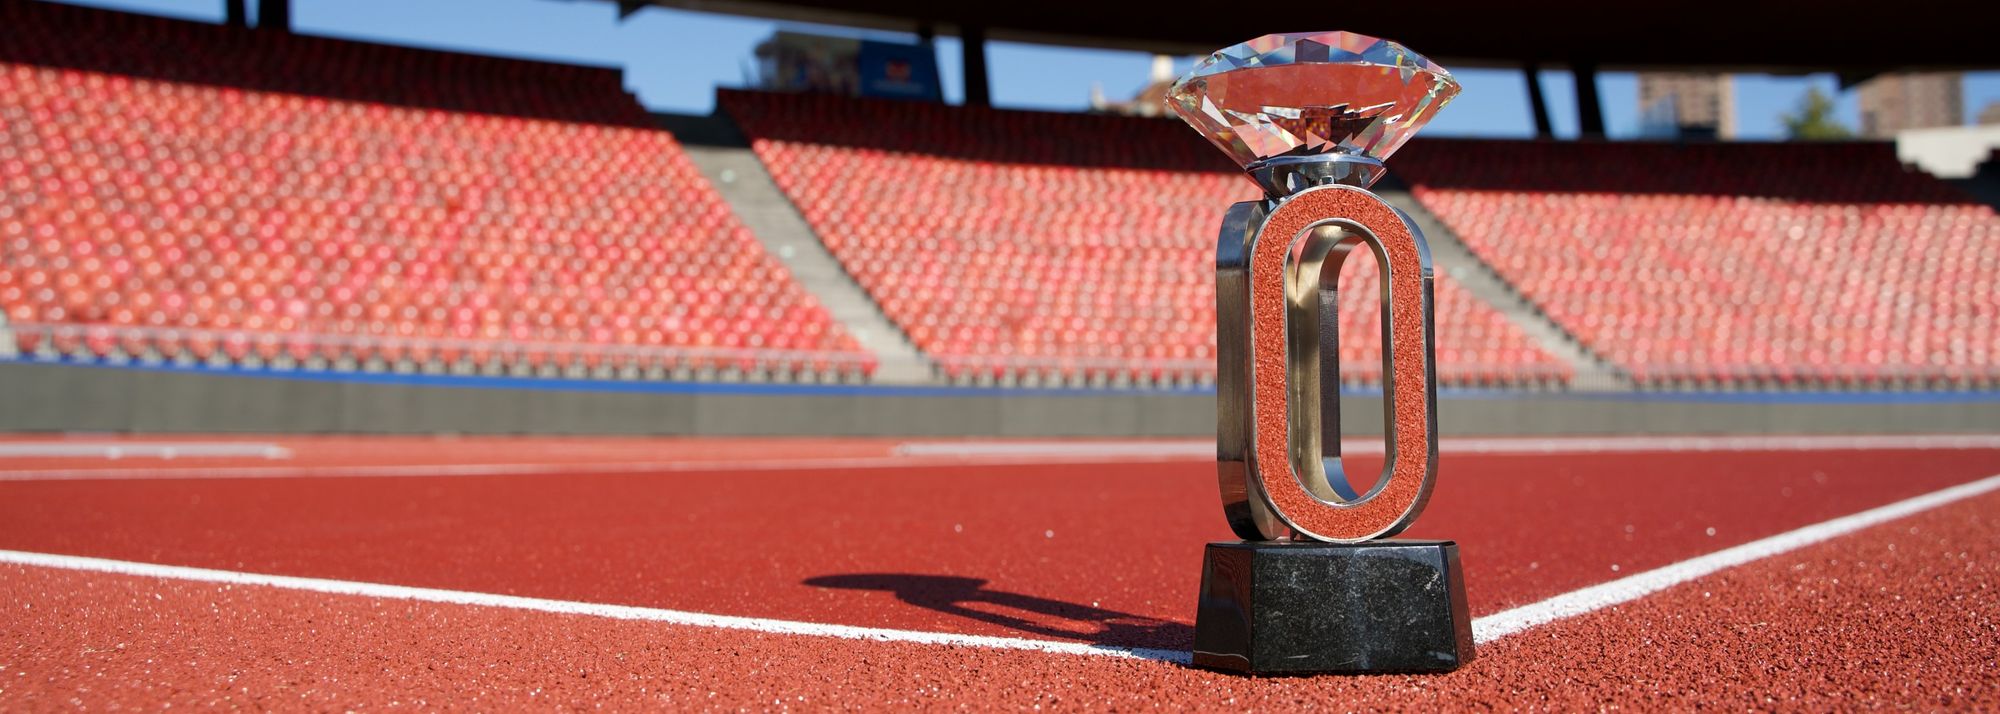 The Wanda Diamond League has released the full allocation of scoring disciplines to specific meetings in athletics’ premier one-day meeting series in 2023.